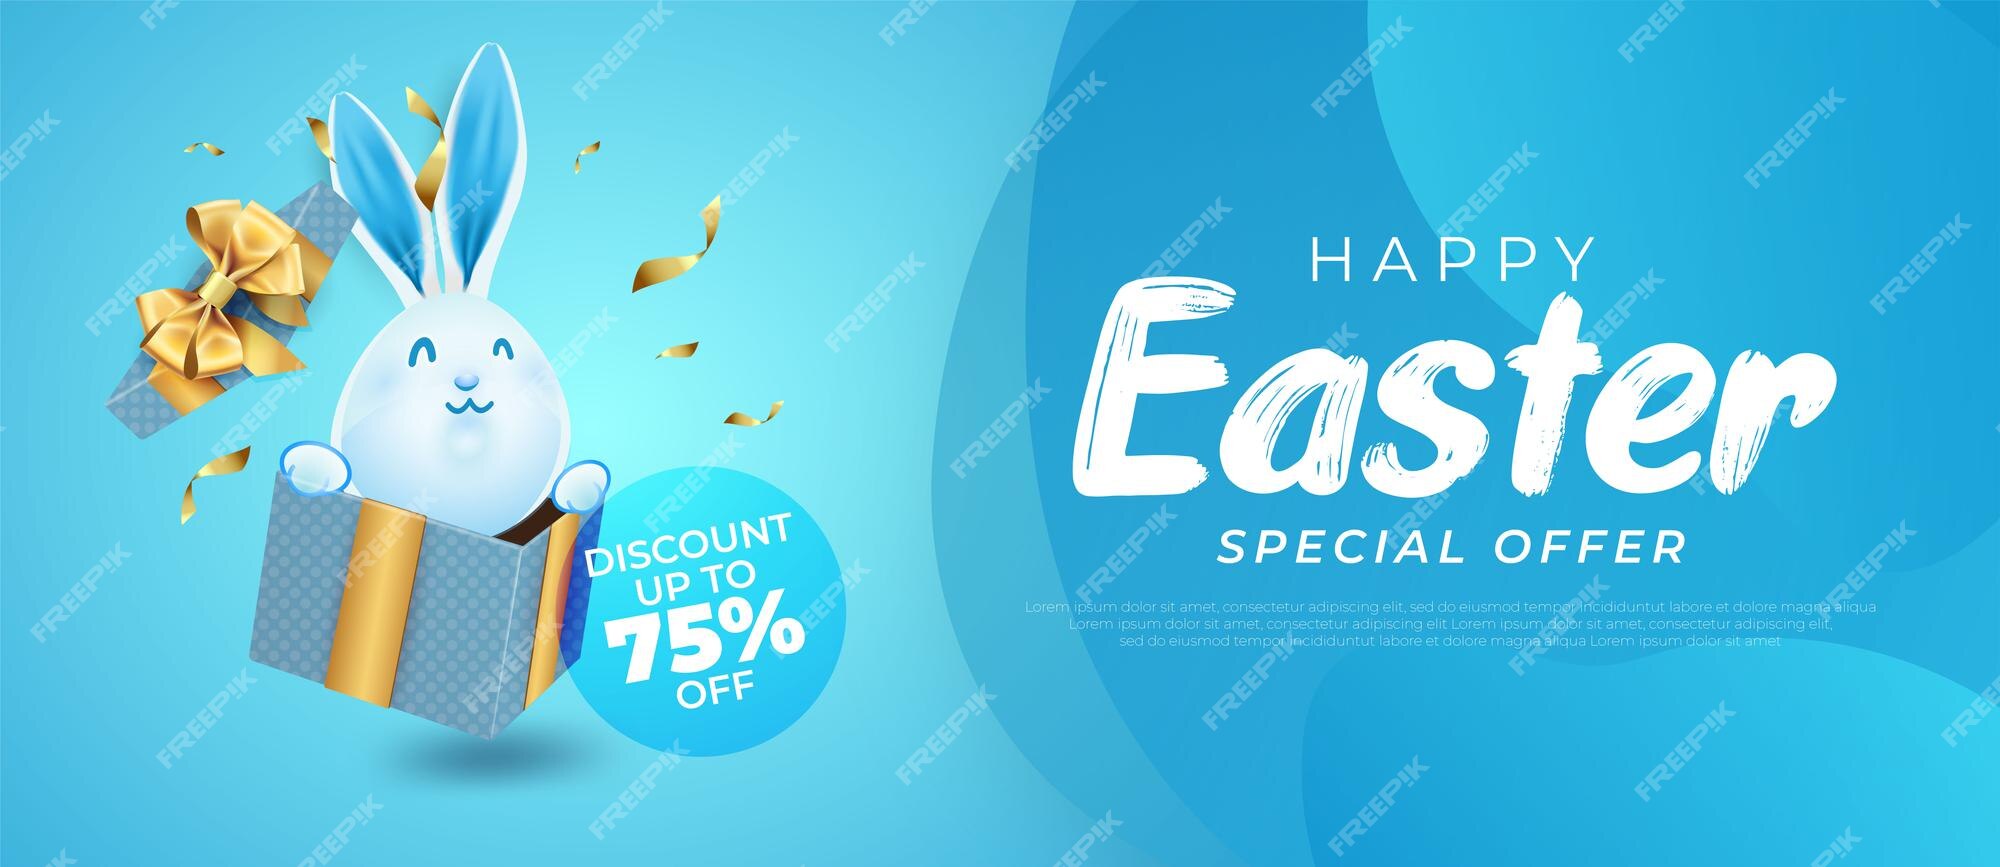 premium-vector-happy-easter-banner-template-with-festive-decoration